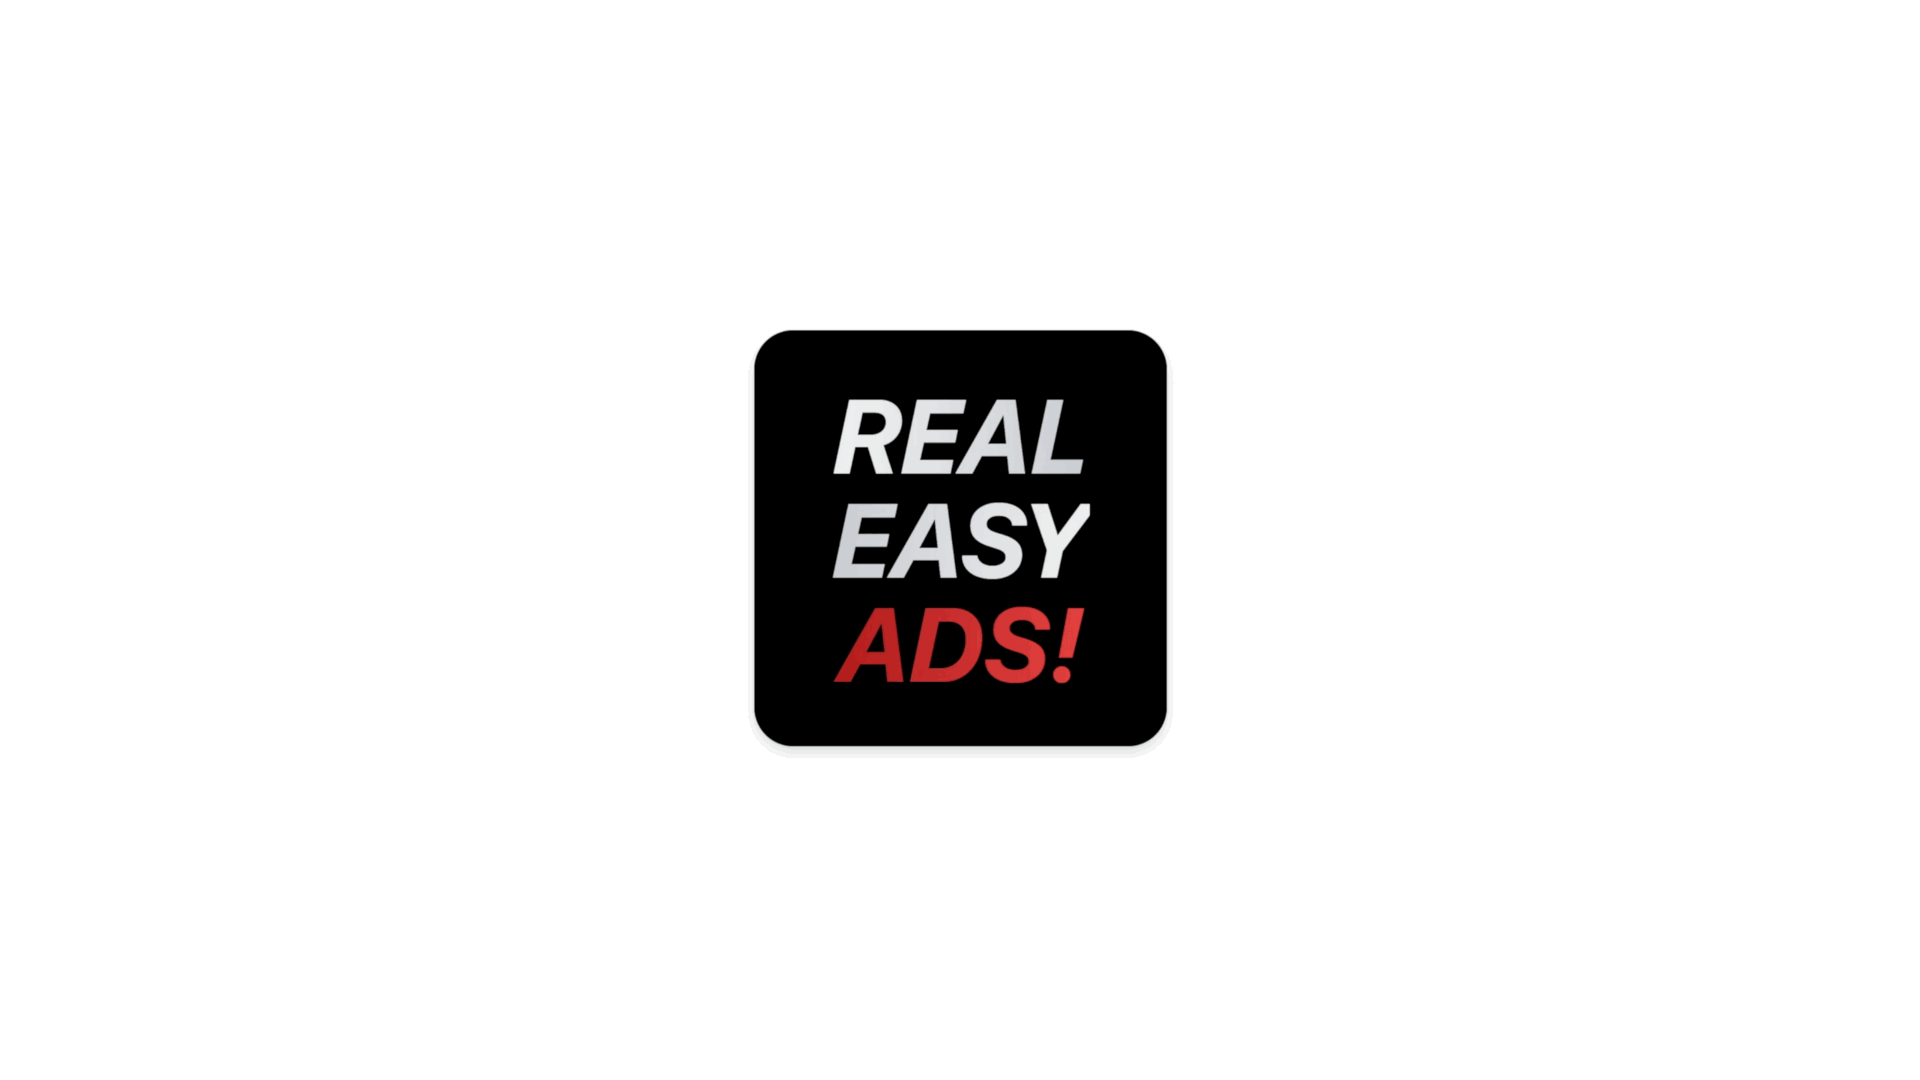 The b00st.com Real Easy Ads button.